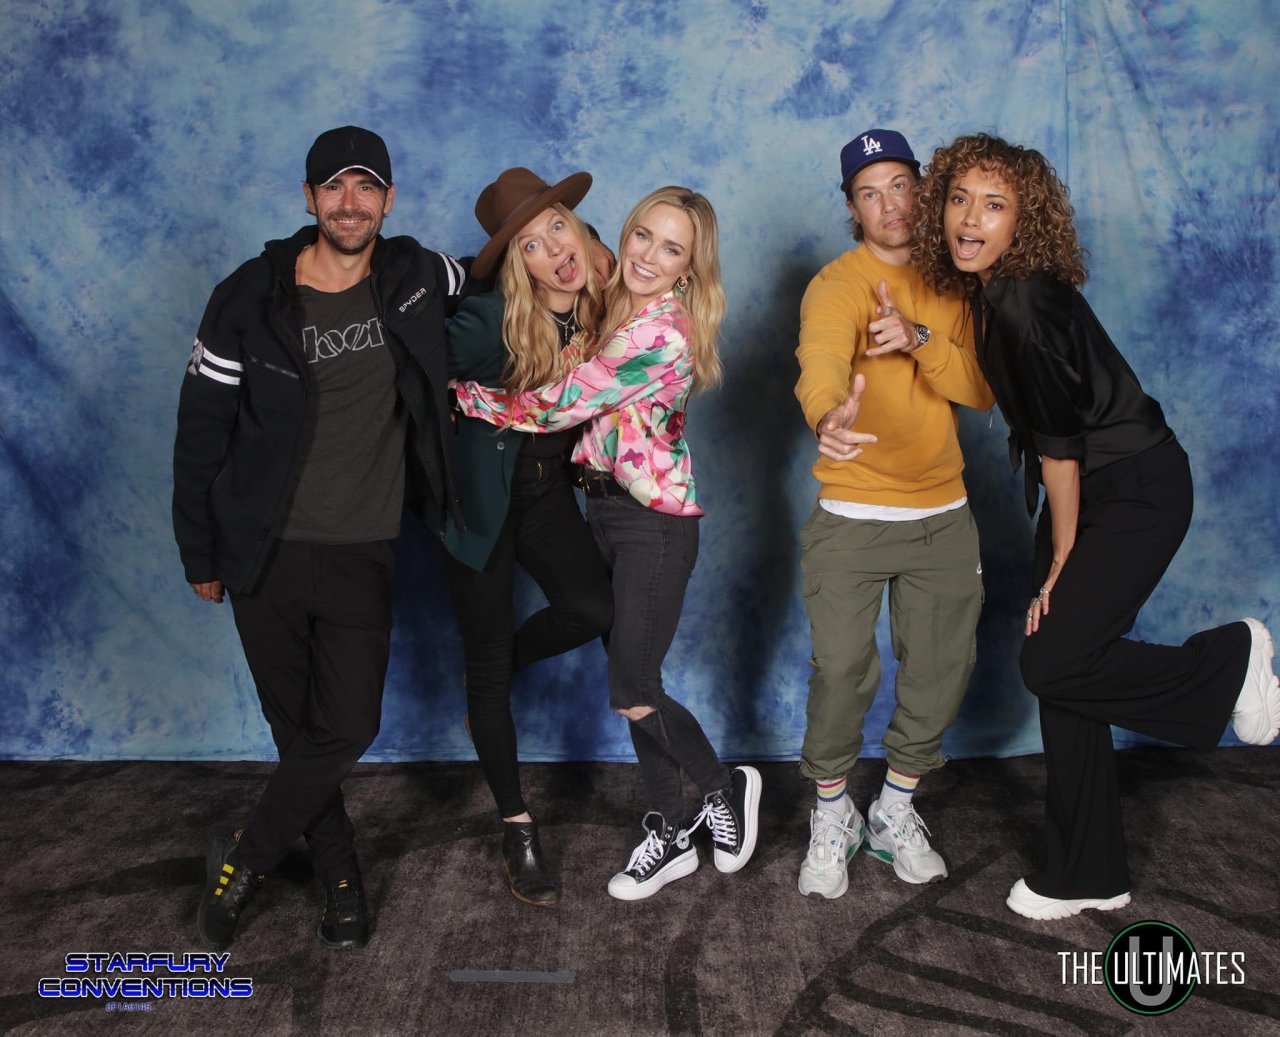 #legends of tomorrow #matt ryan#jes macallan#caity lotz#nick zano#olivia swann #high school yearbook pic  #going to be real #mostly posting #for the jes and caity part